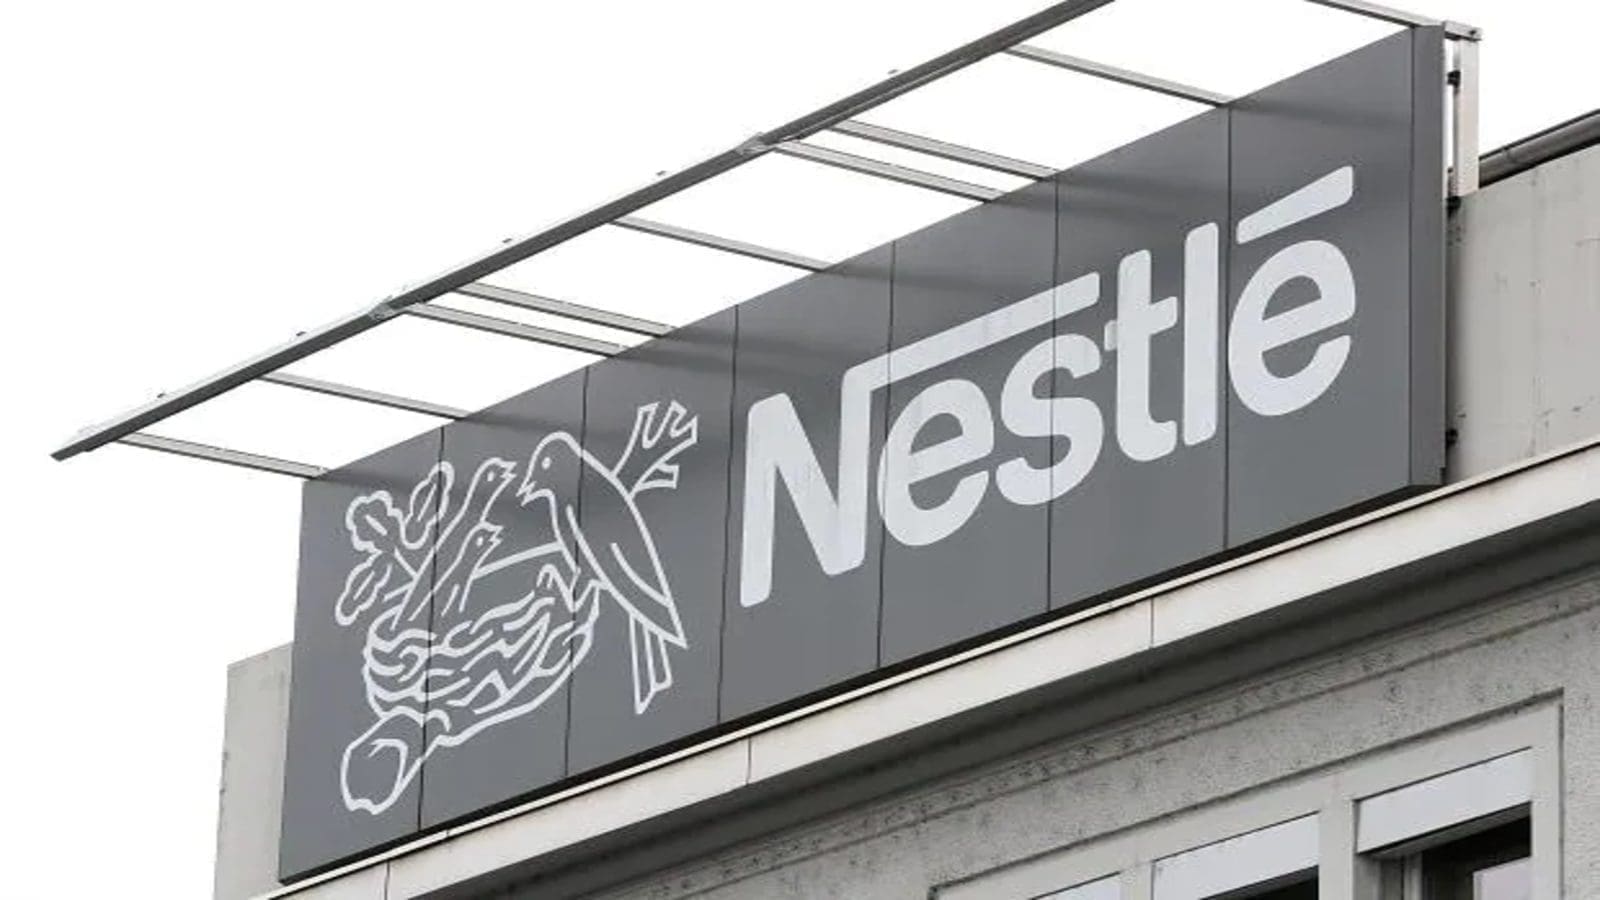 Nestlé reports 9.2% revenue rise in Q3 results, advances inflation costs to customers through price increase